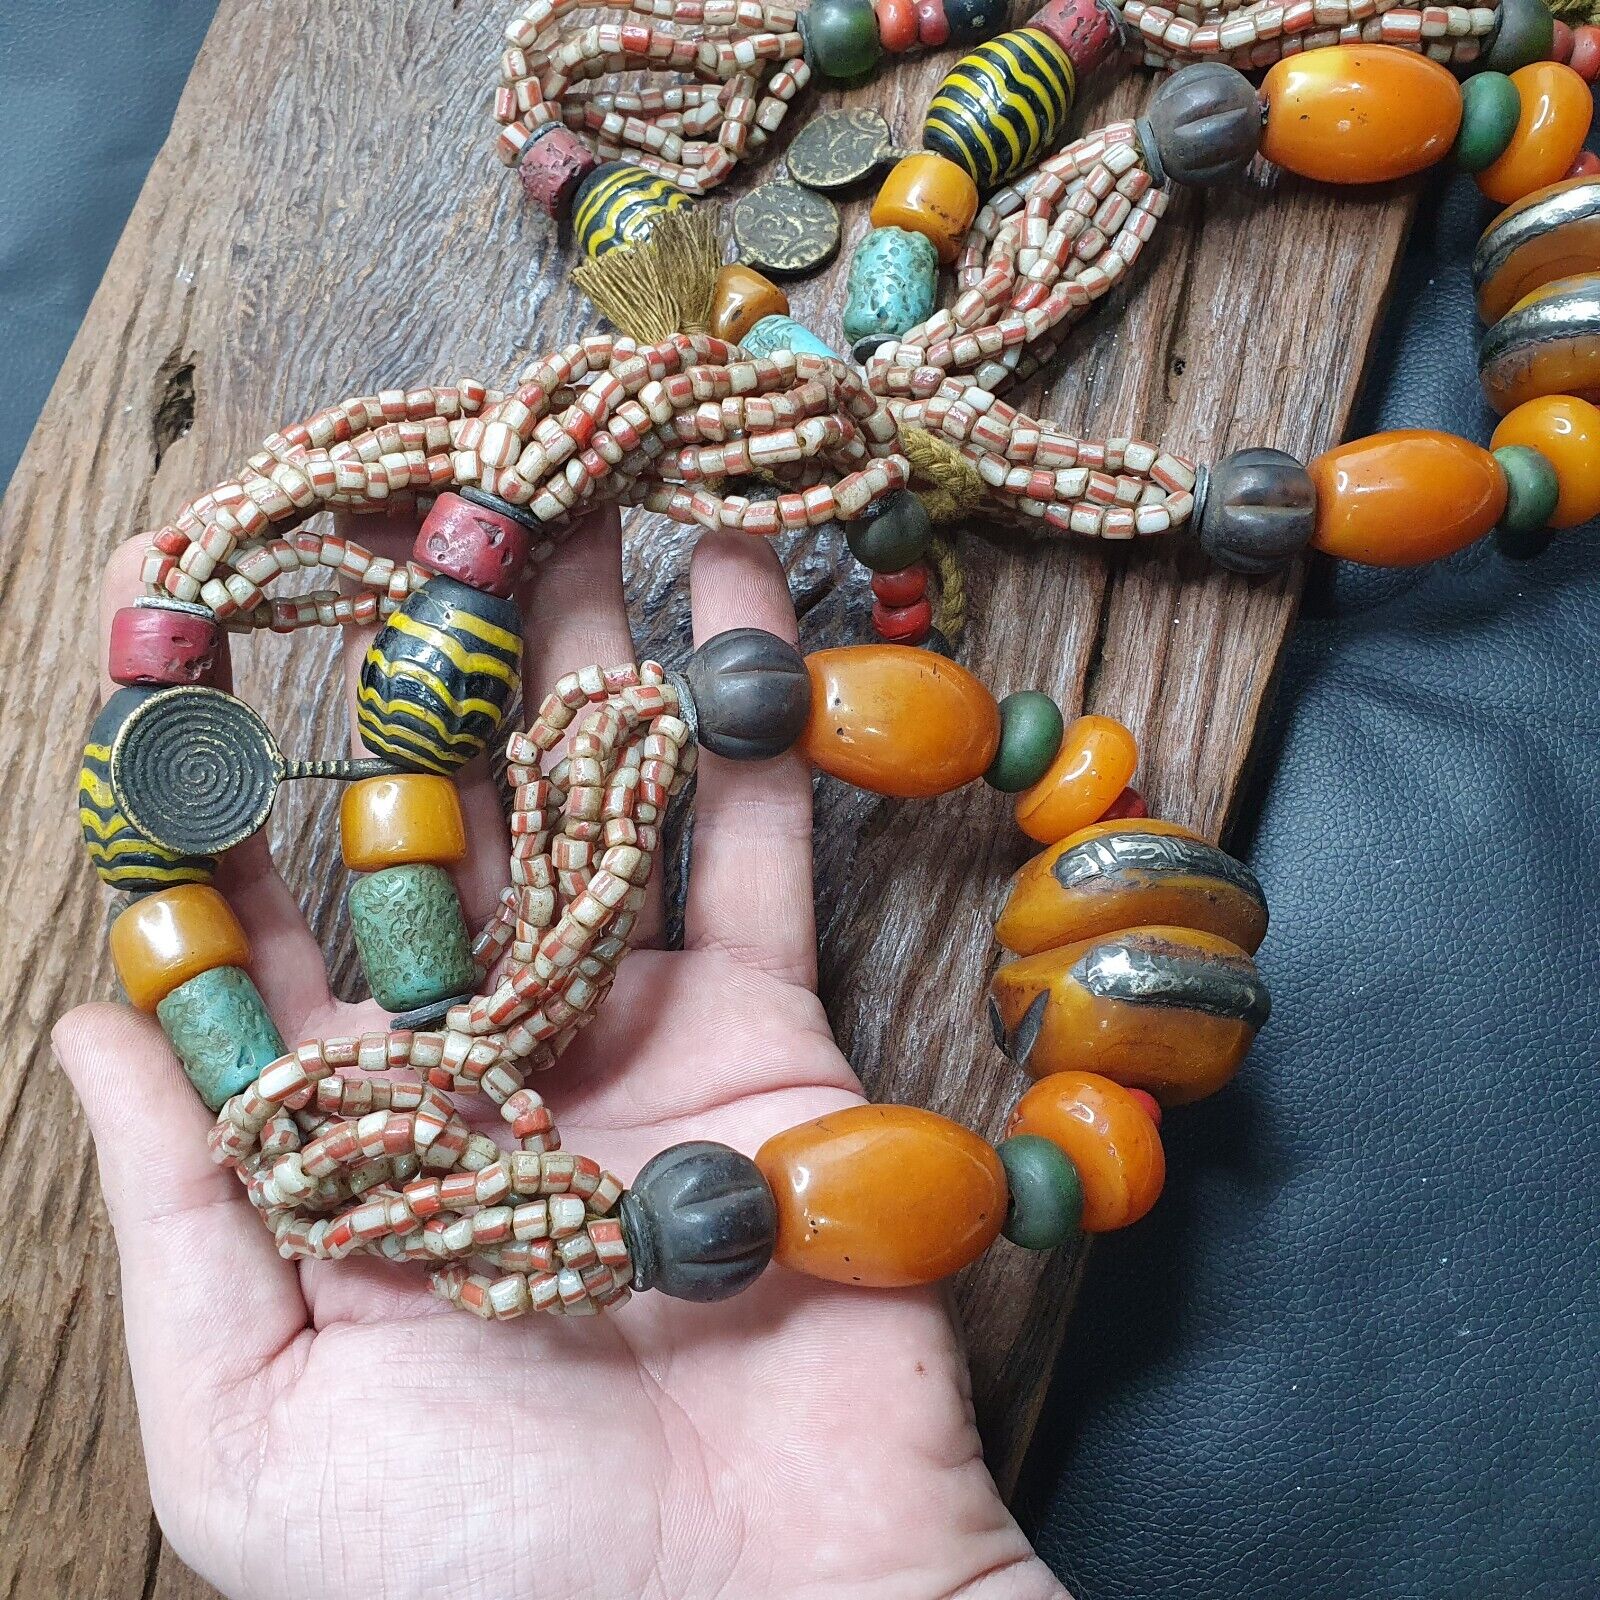 Handcrafted Amber Resin and glass beads Vintage Jewelry Necklace 271grams